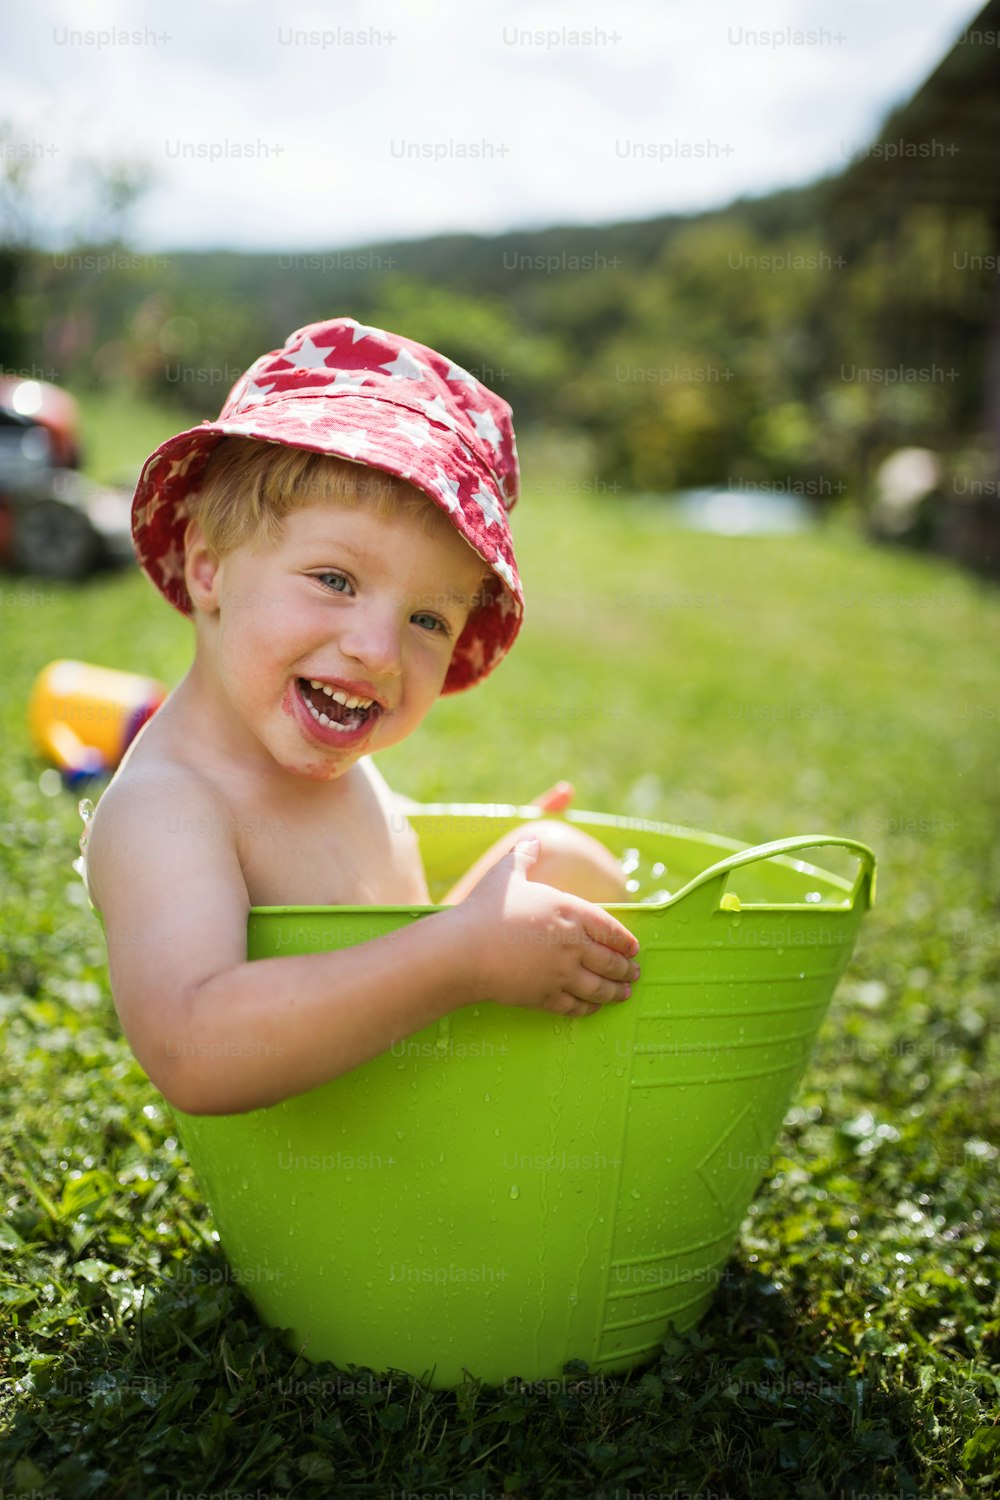 Small boy with a hat sitting in plastic bucket outdoors in garden in summer, playing in water.